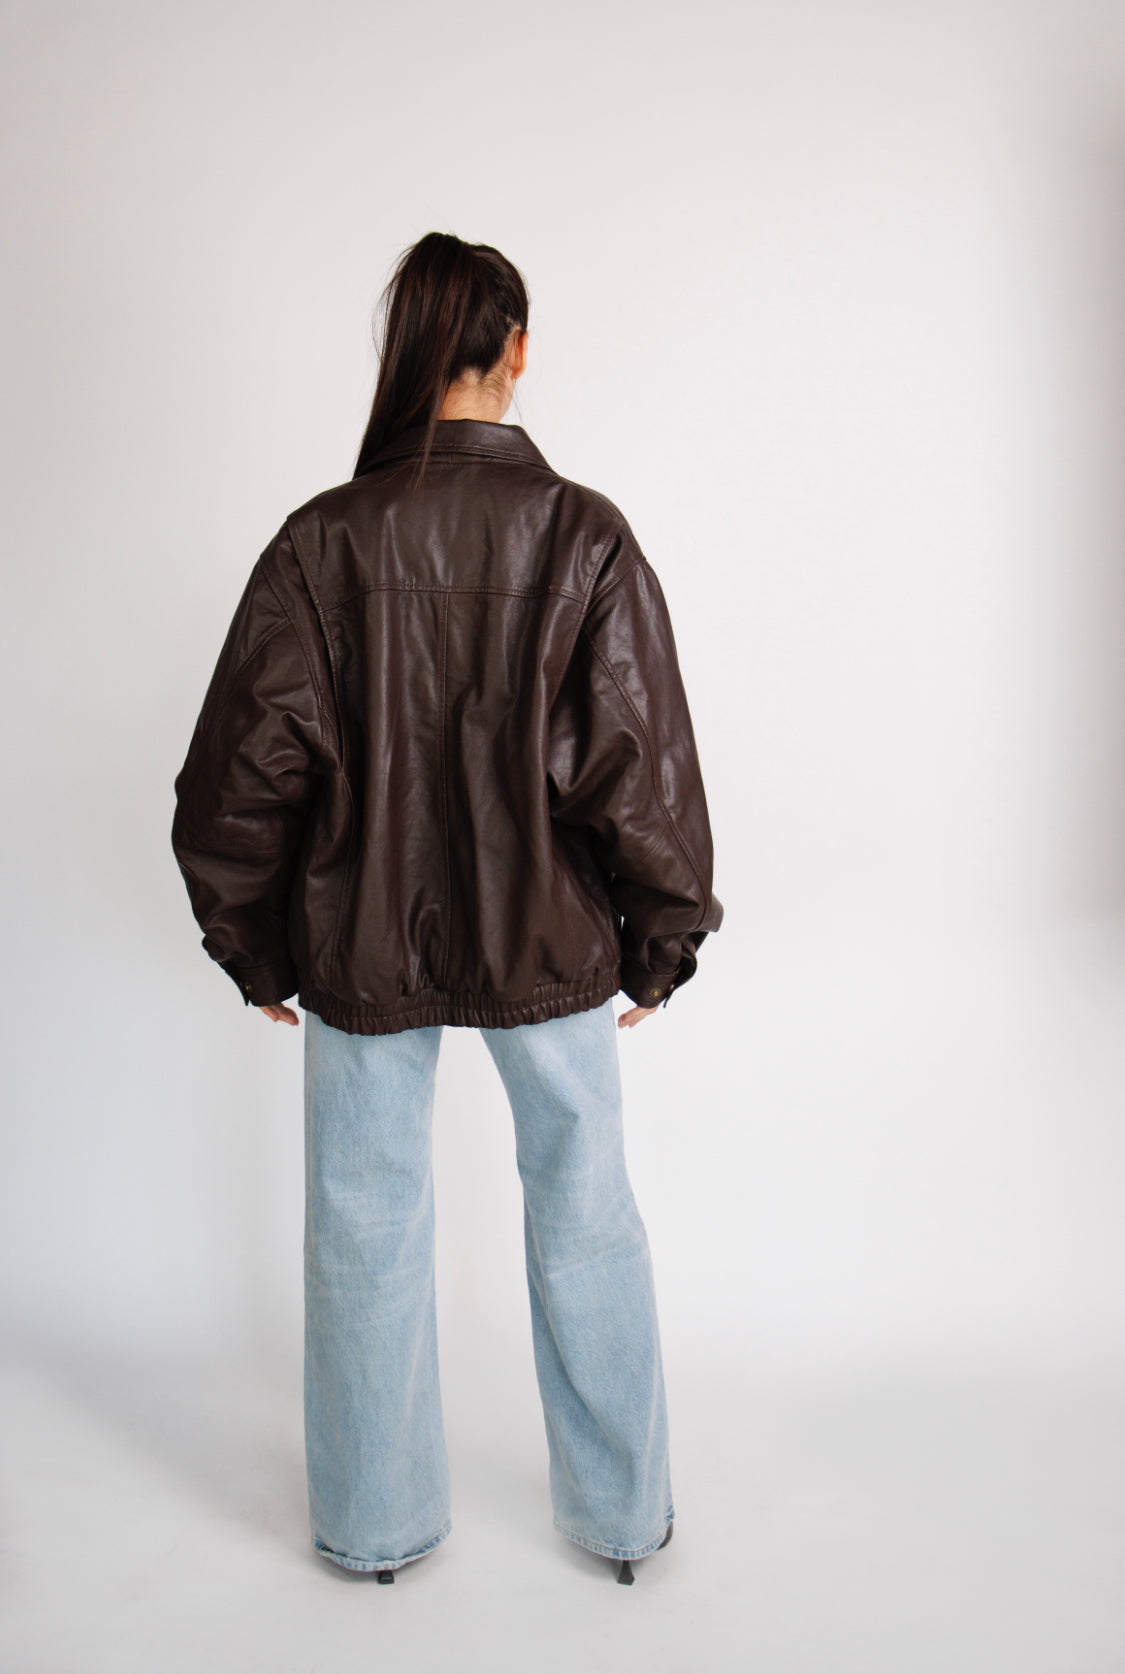 Reiss 90’s Oversized Brown Leather Jacket – In My Element